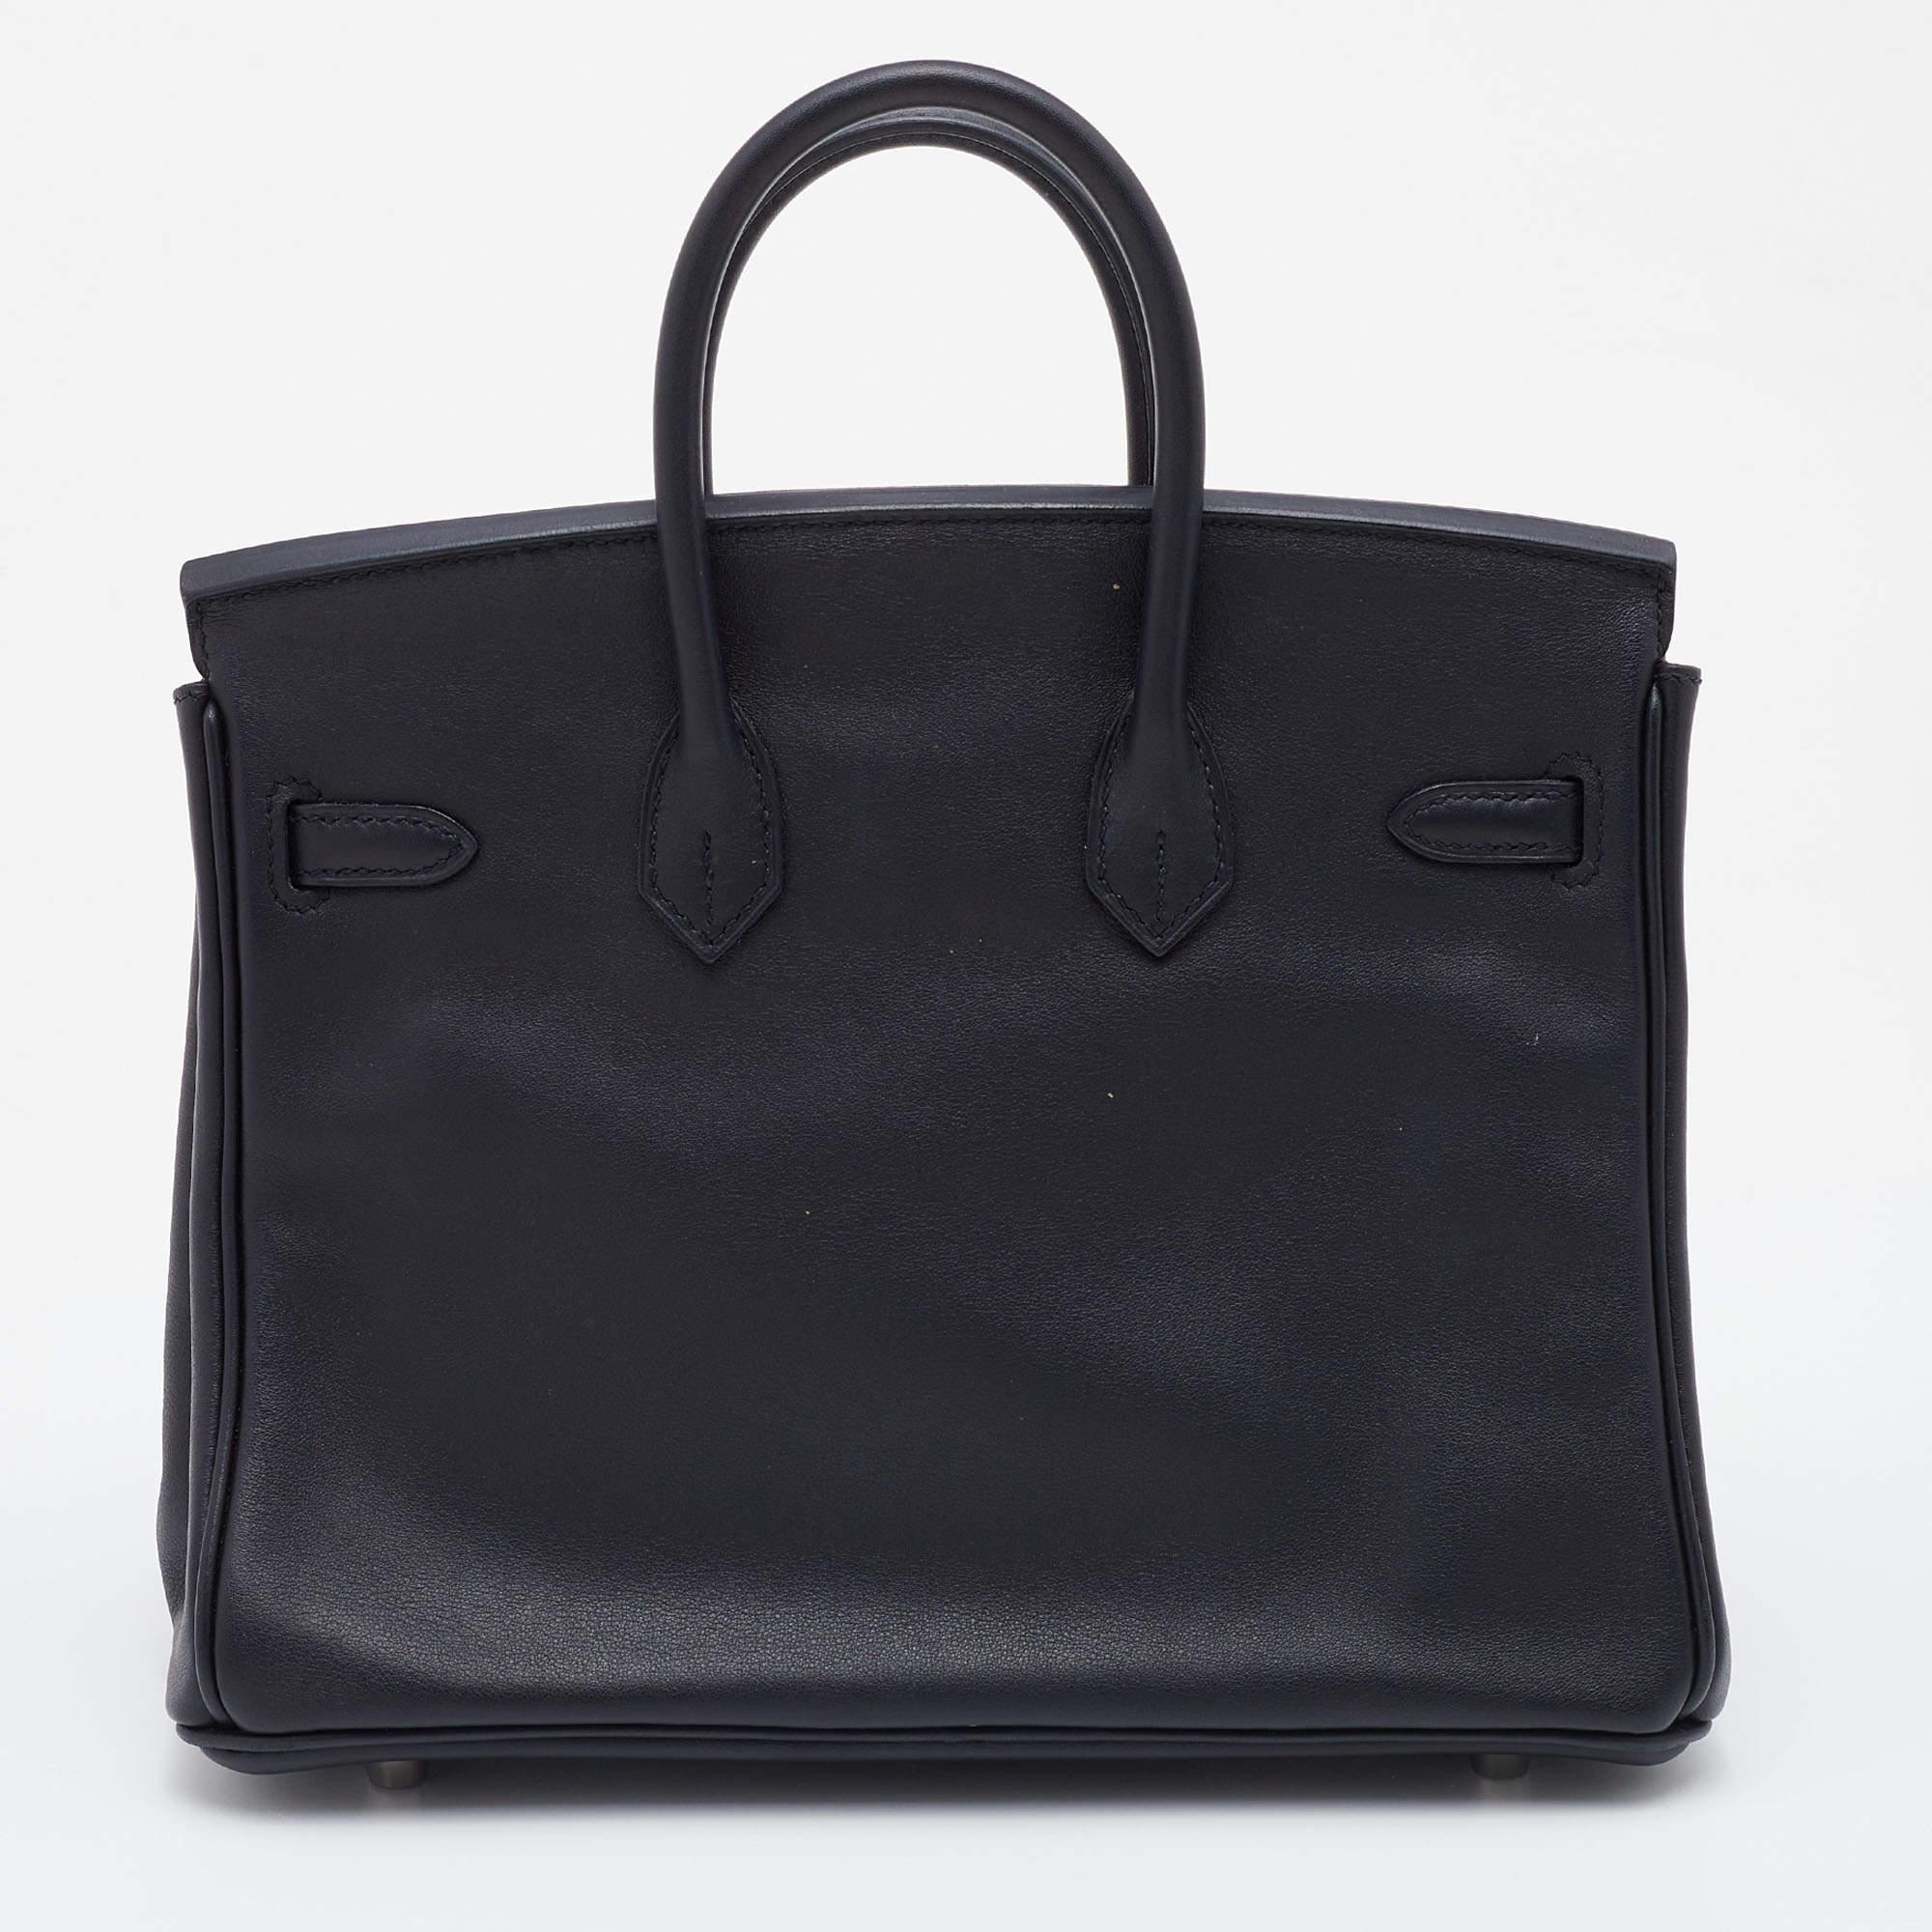 The Hermès Birkin is rightly one of the most desired handbags in the world. Handcrafted from the highest quality leather by skilled artisans, it takes long hours of rigorous effort to stitch a Birkin together. Crafted with expertise, the bag